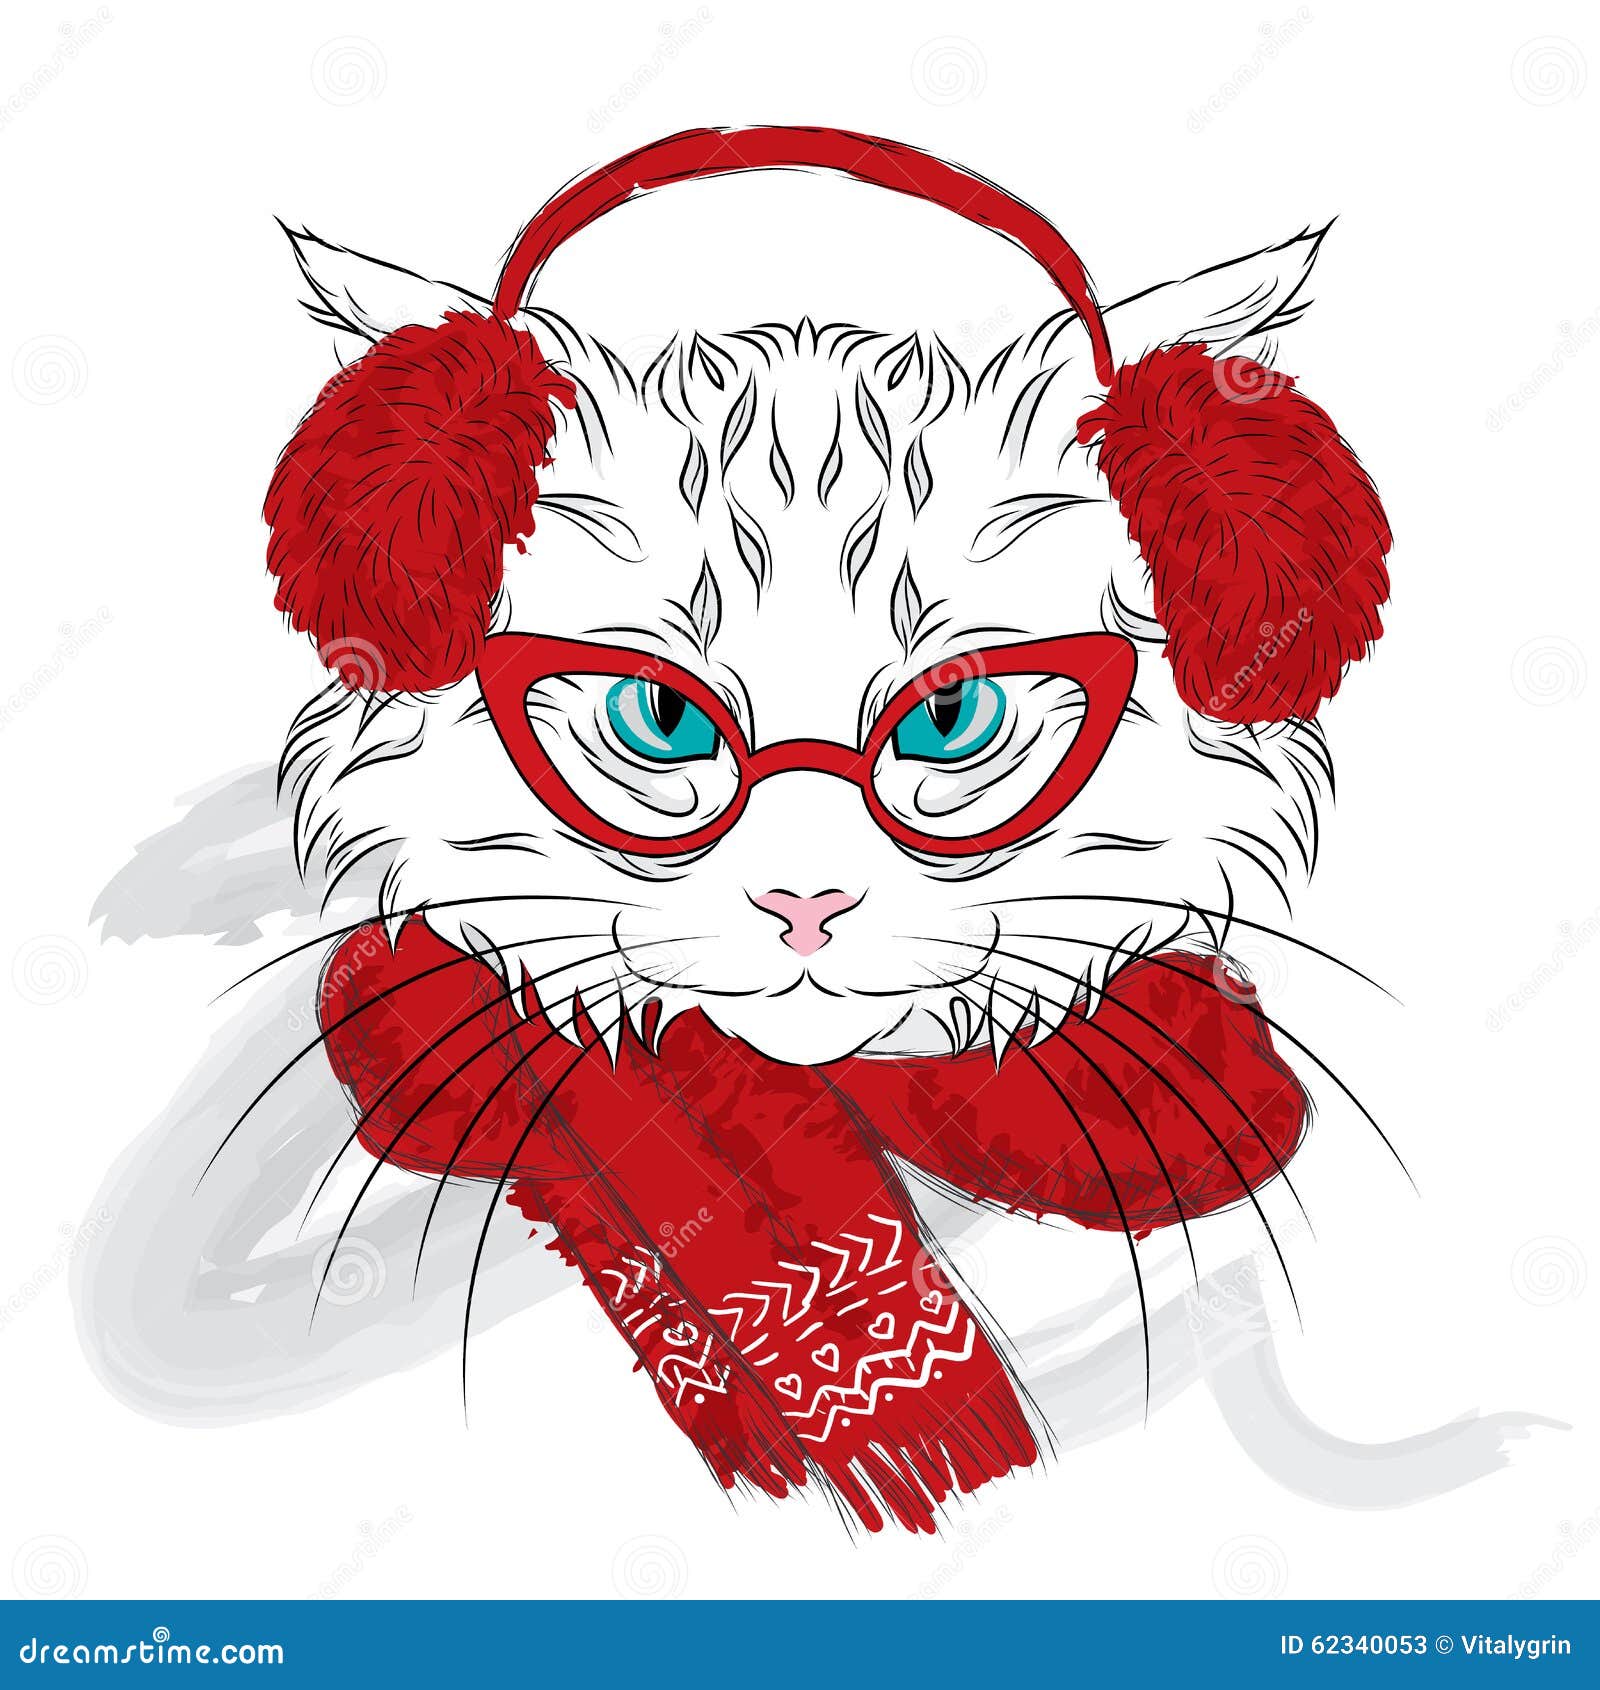 cat were drawn by hand. cat  . cat in the winter clothes .